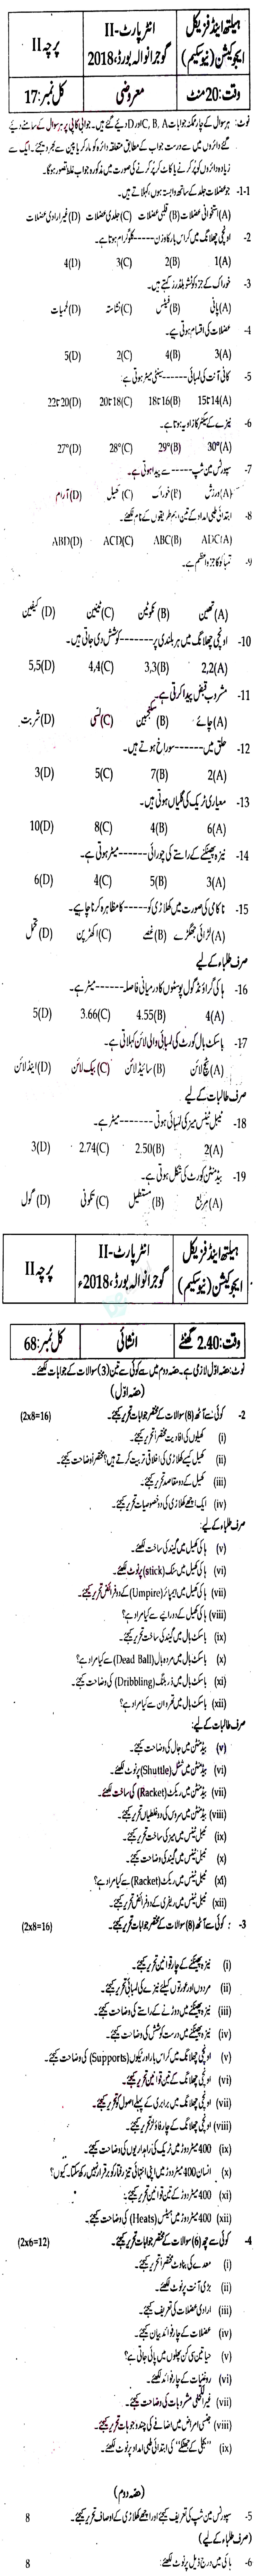 Health and Physical Education FA Part 2 Past Paper Group 2 BISE Gujranwala 2018